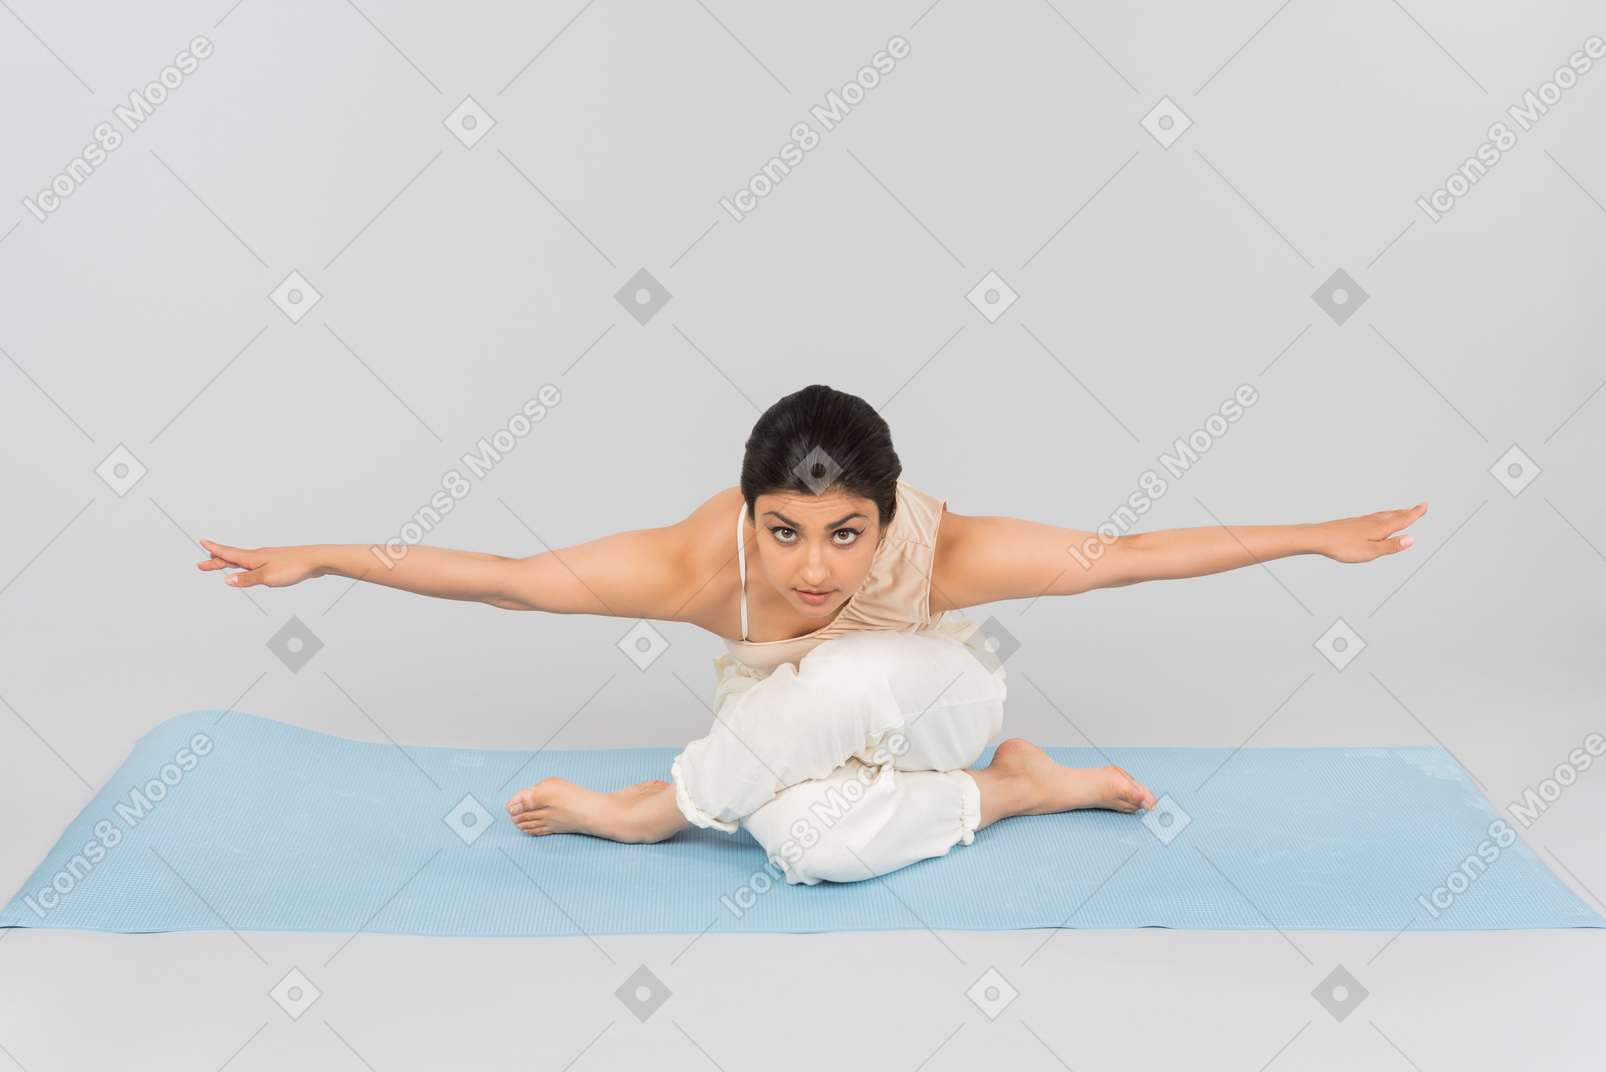 Young indian woman sitting in pose on yoga mat